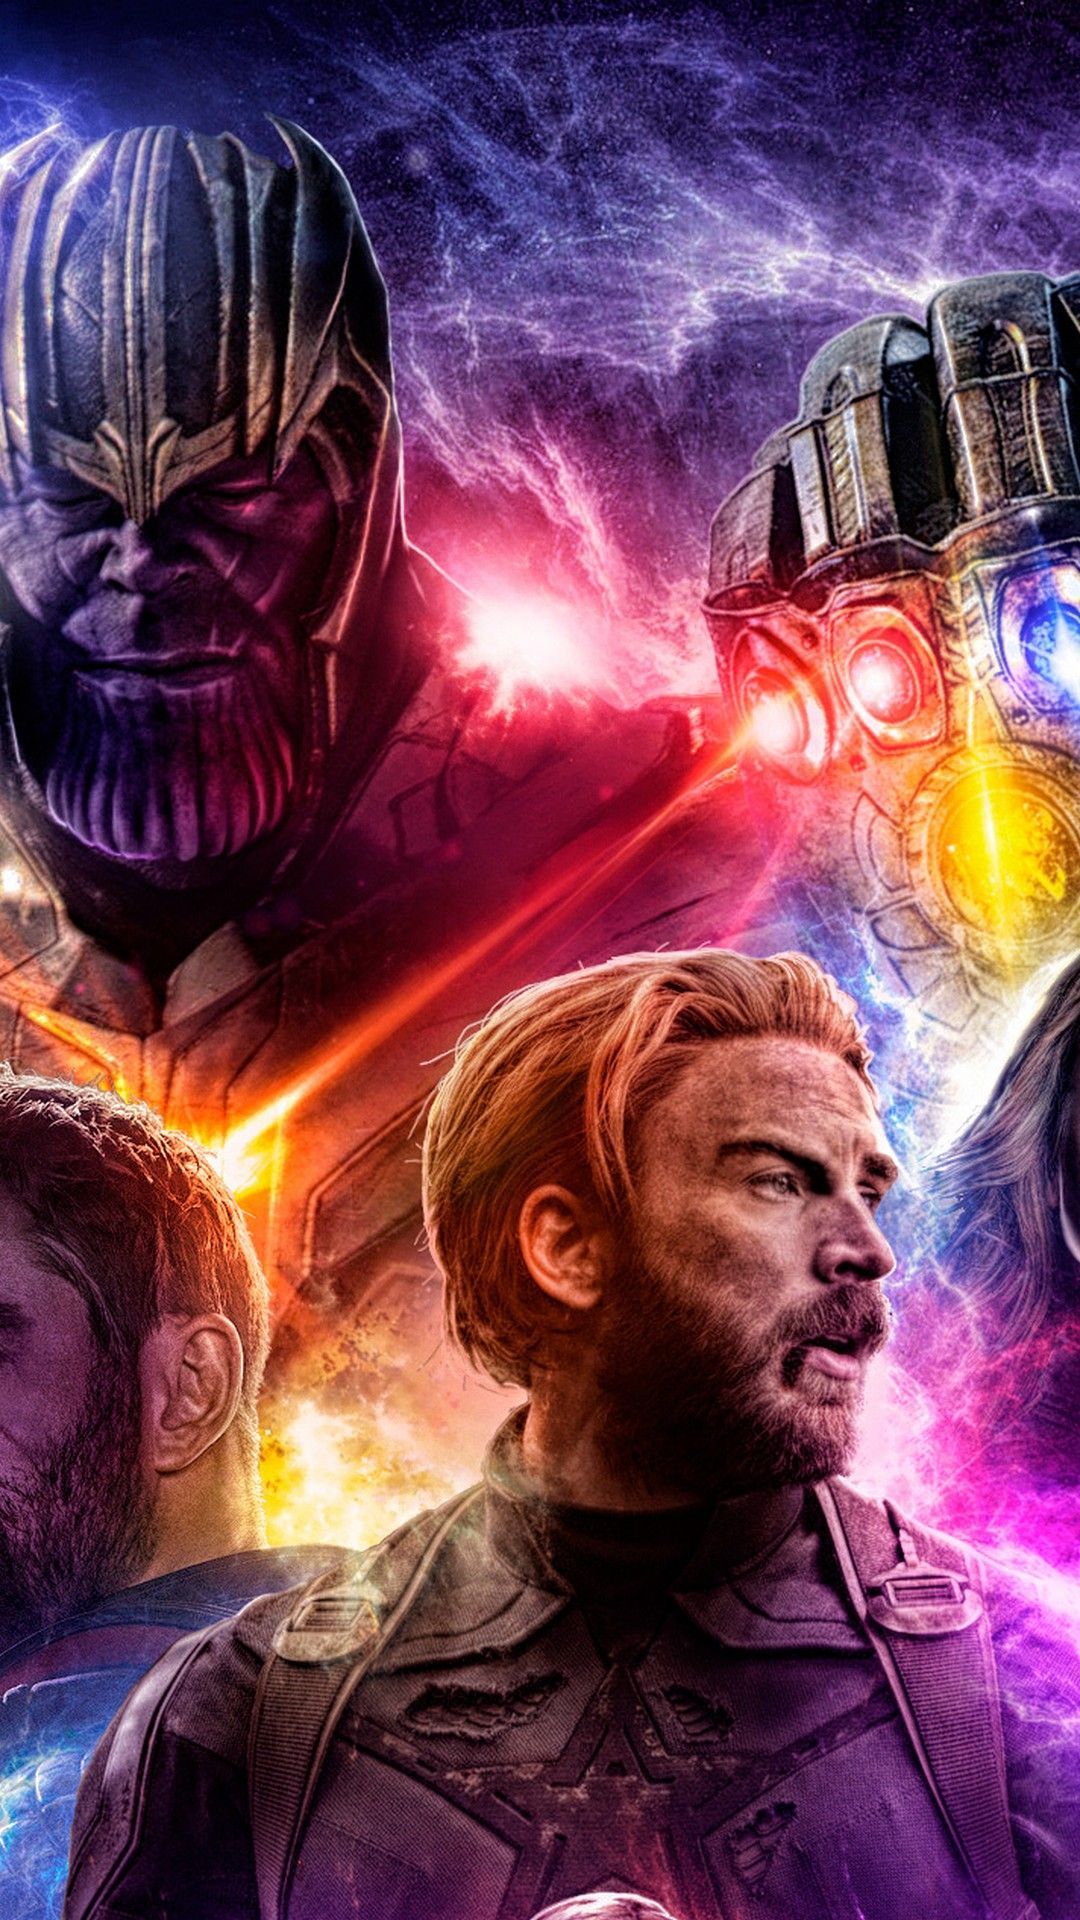 Avengers Endgame Wallpaper IPhone With High Resolution 1080x1920